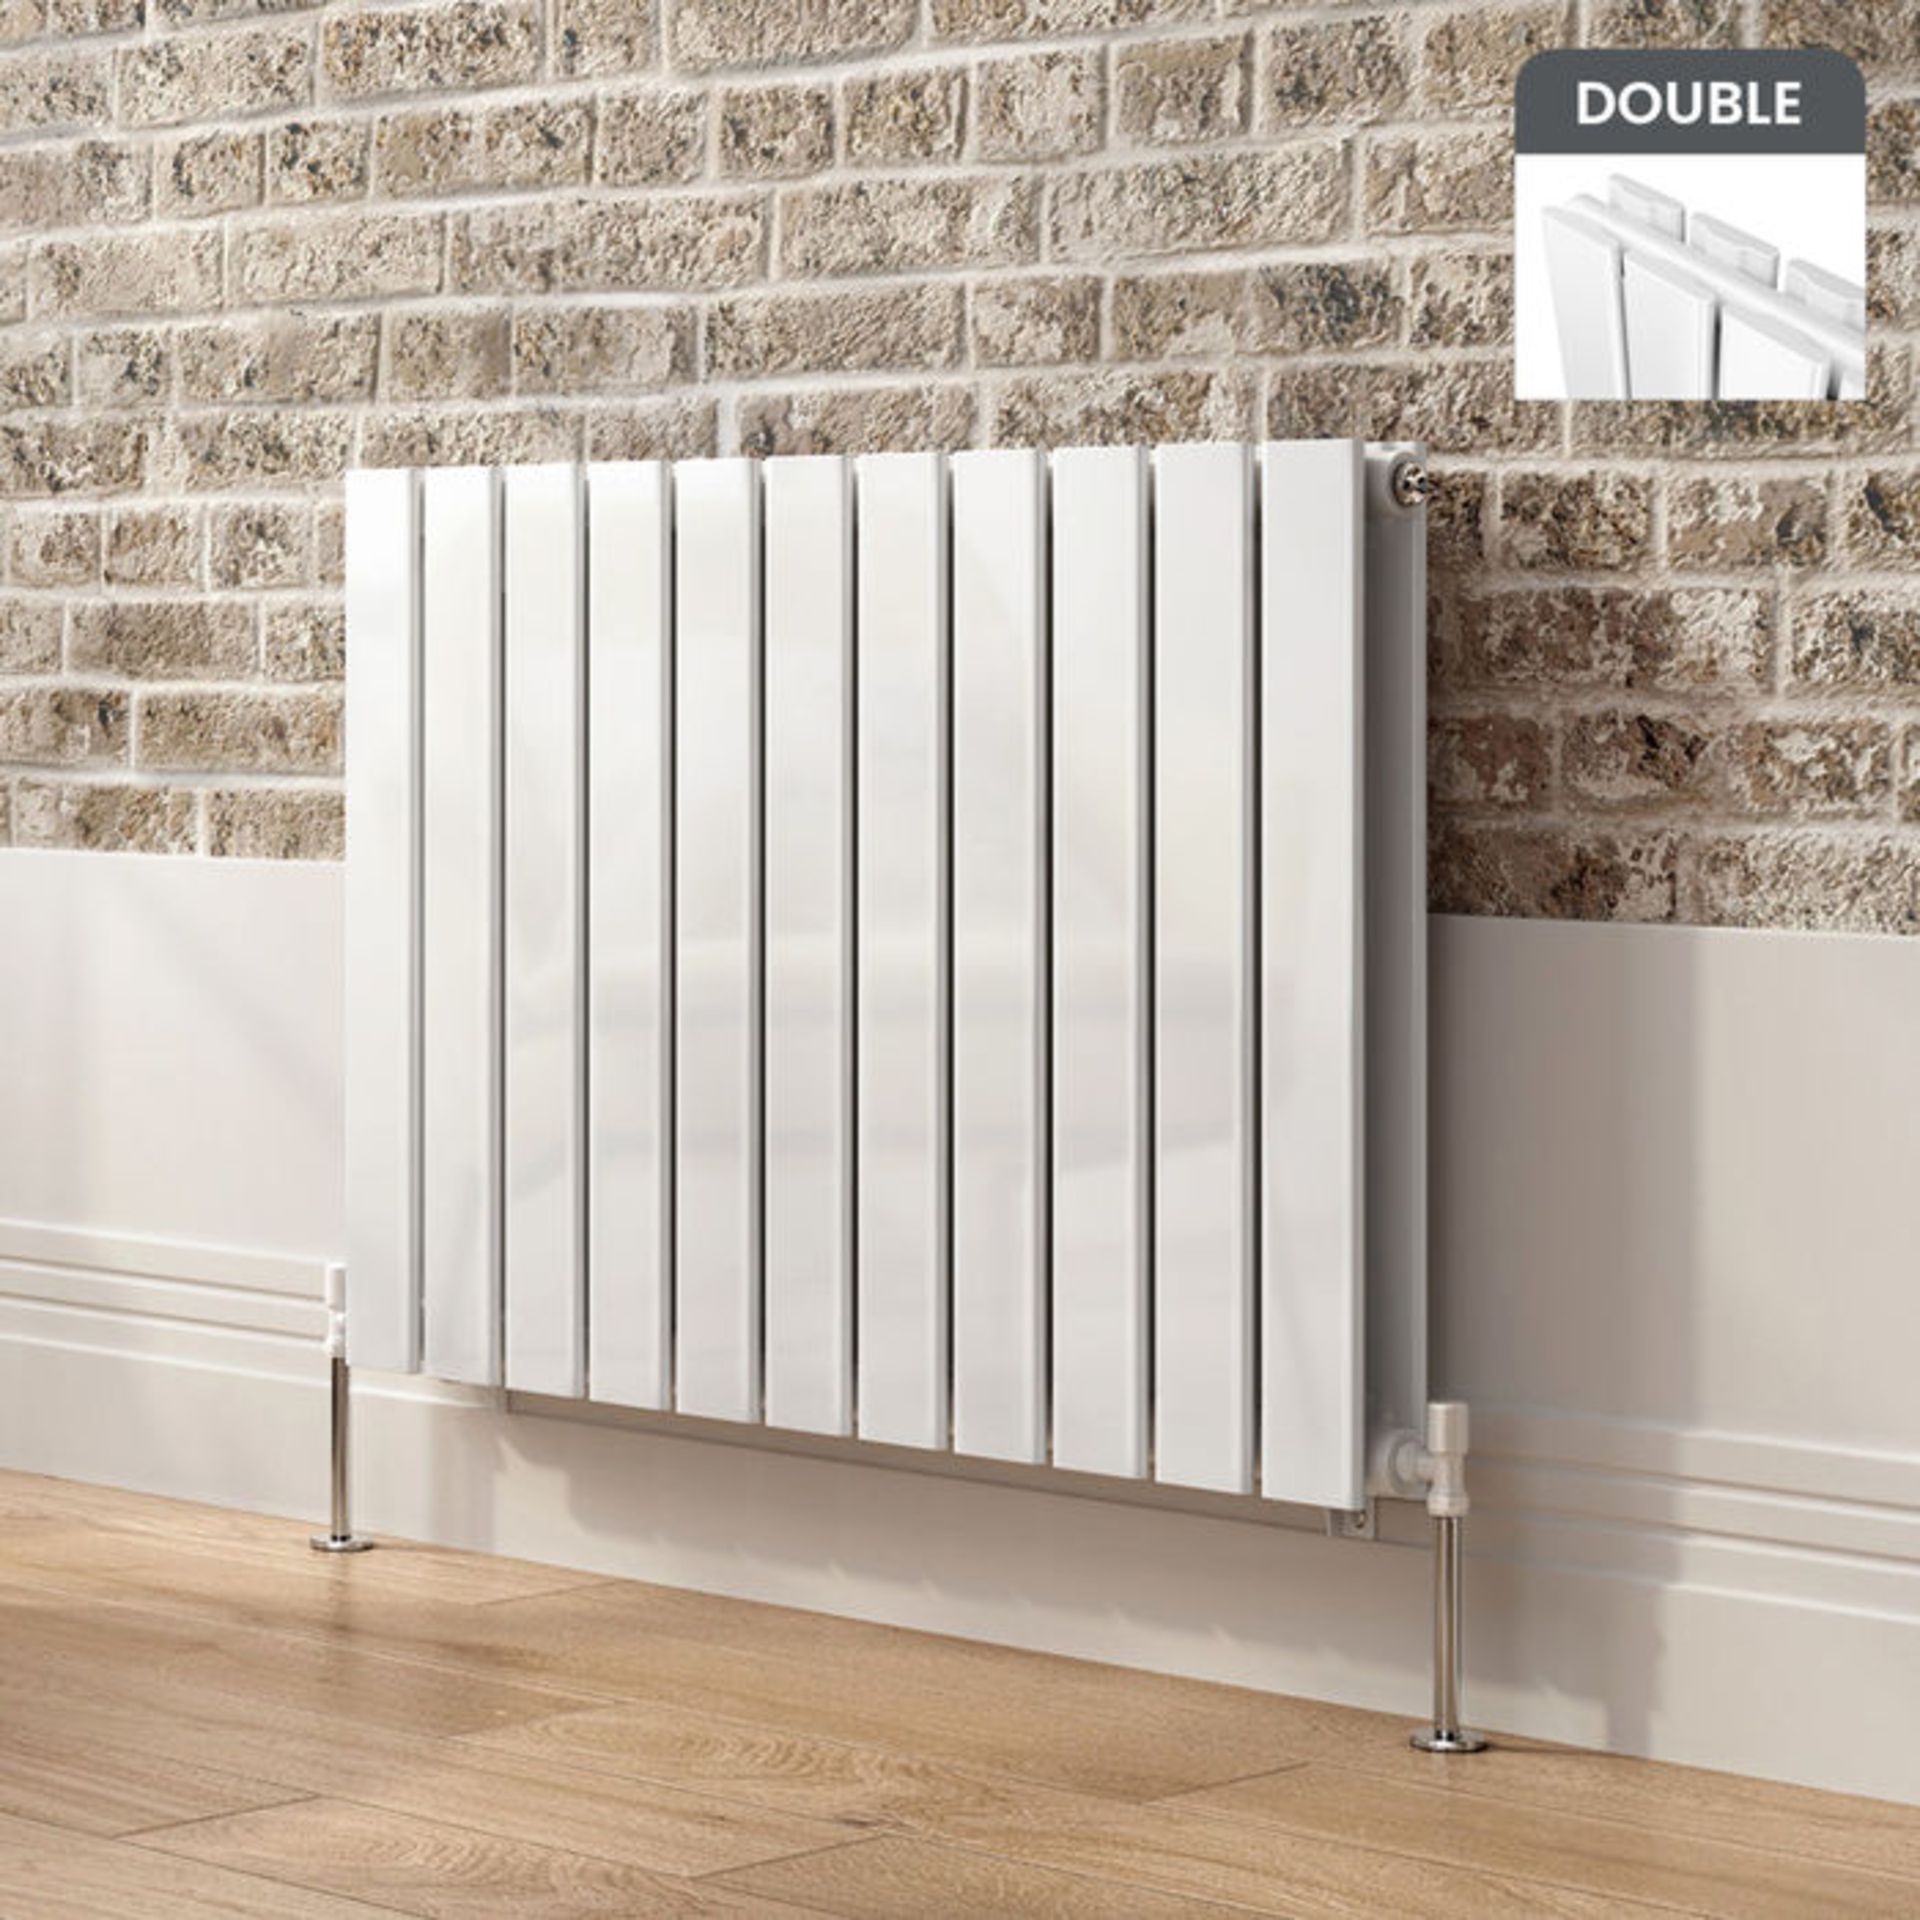 600x830mm Gloss White Double Flat Panel Horizontal Radiator. RC221. RRP £474.99. Made with hig...